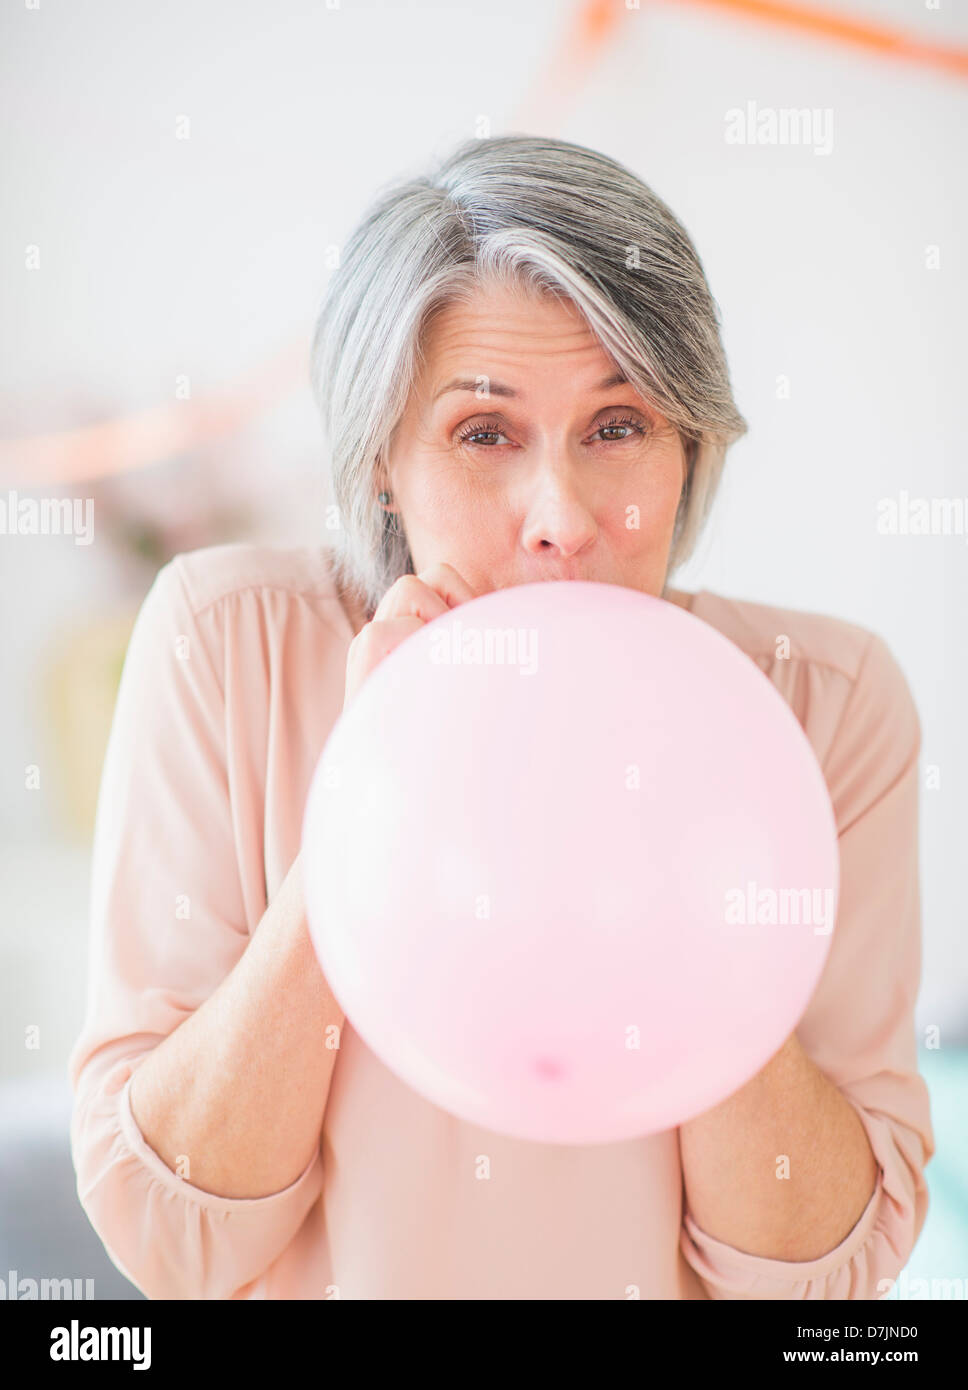 Portrait of woman blowing balloon Stock Photo